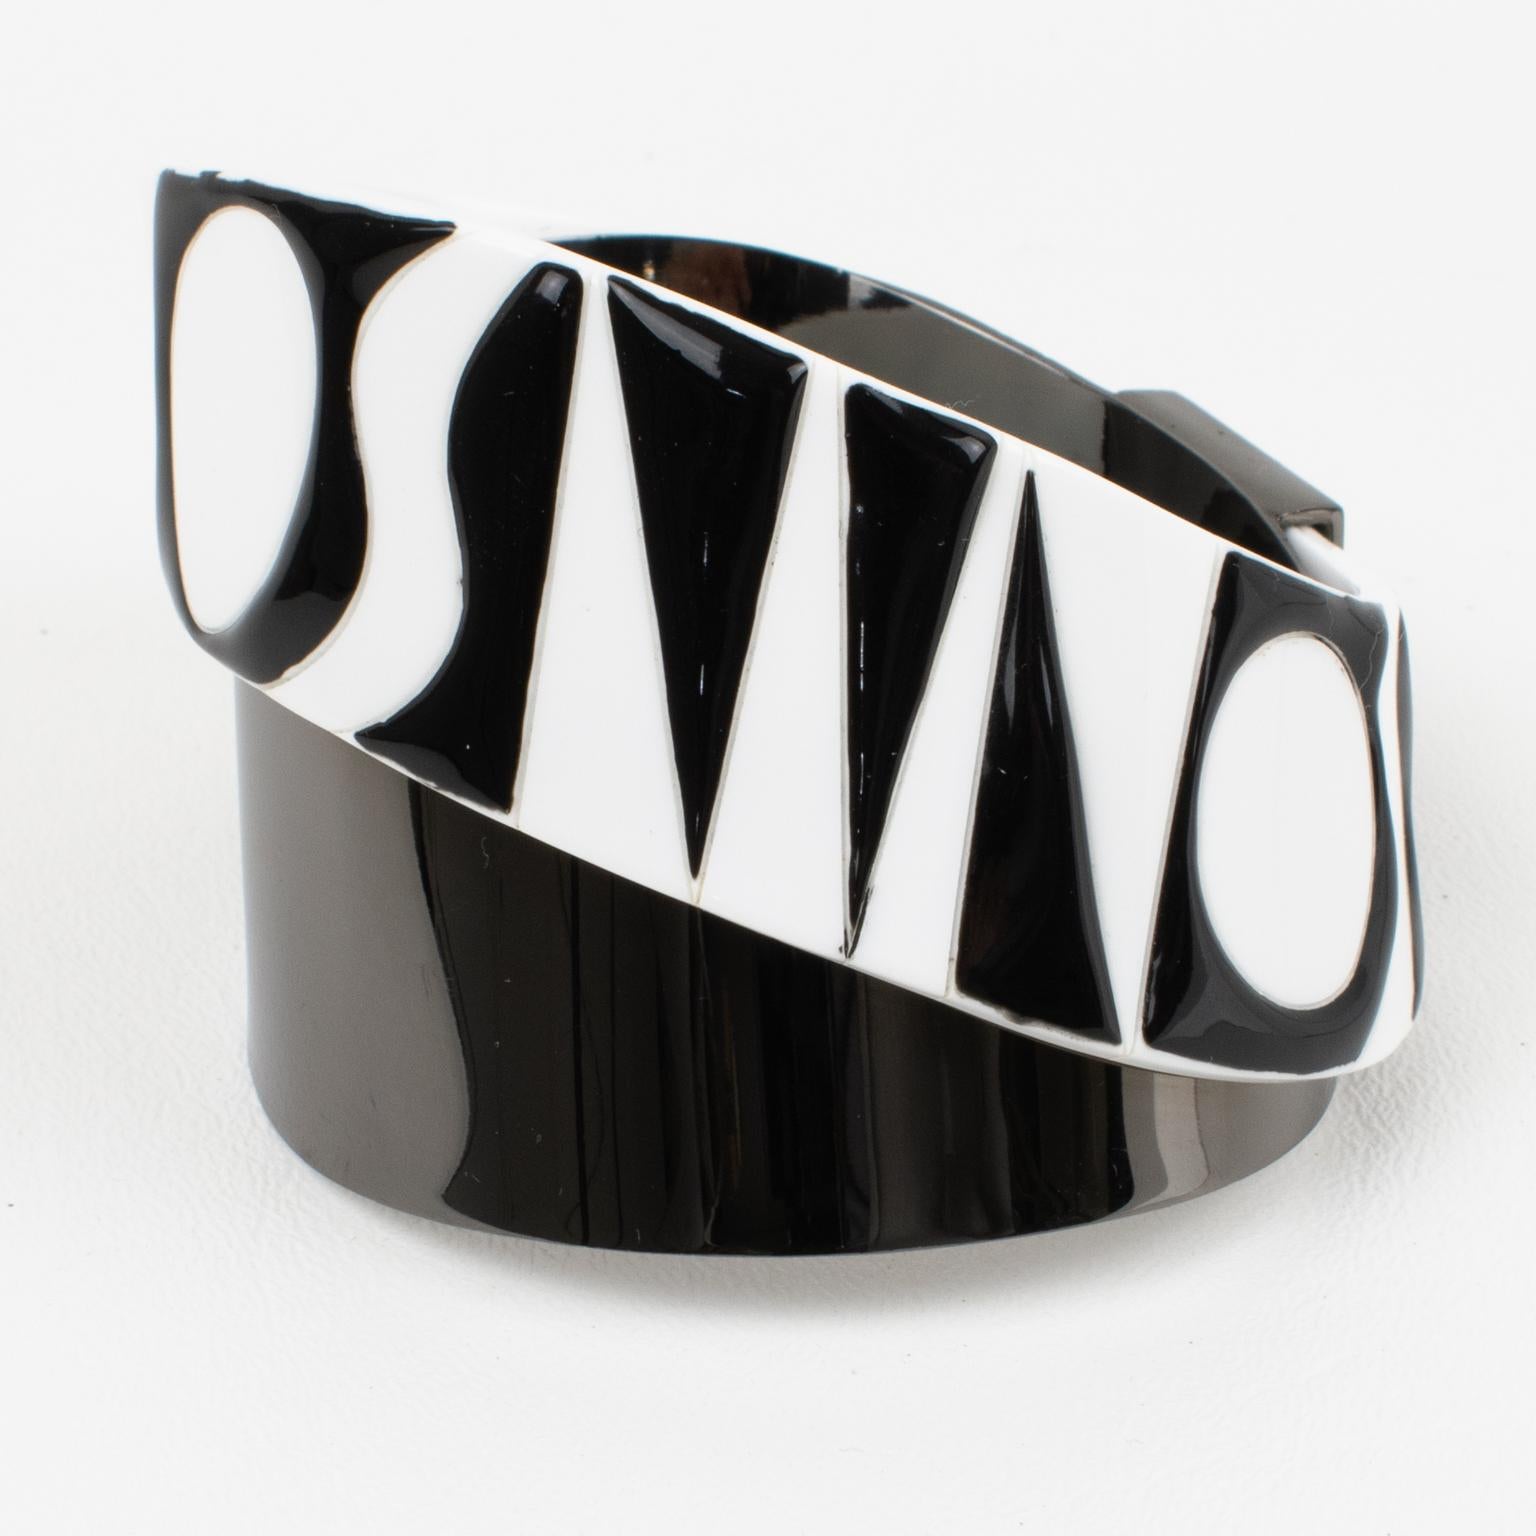 Modern Missoni Black and White Lucite and Metal Bracelet Bangle, Runway Spring 2014 For Sale